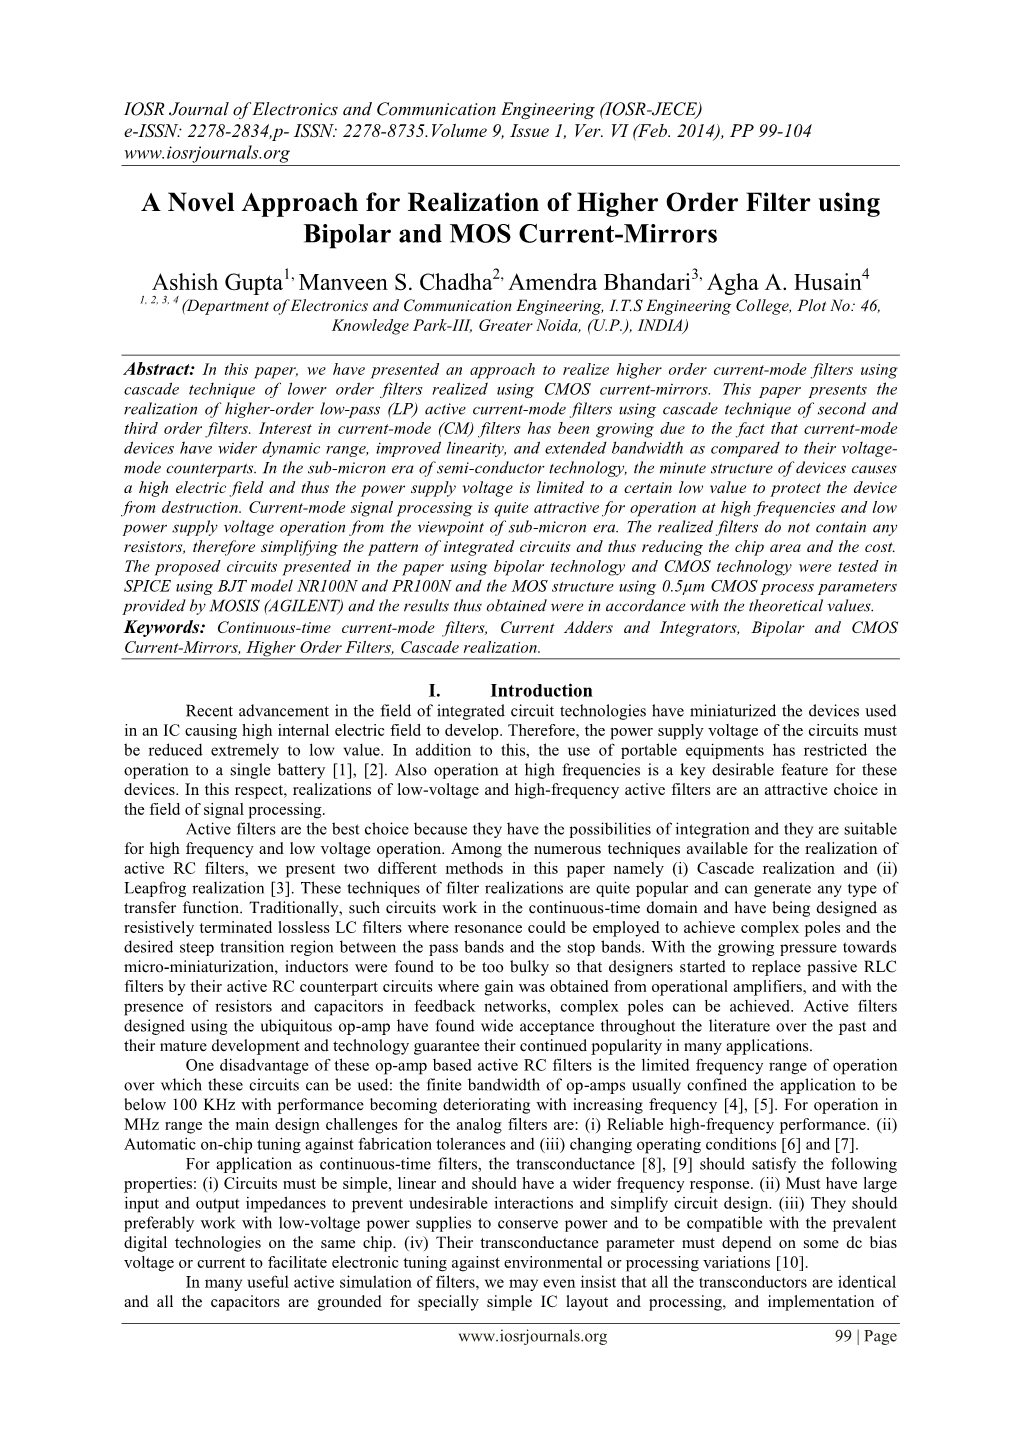 A Novel Approach for Realization of Higher Order Filter Using Bipolar and MOS Current-Mirrors